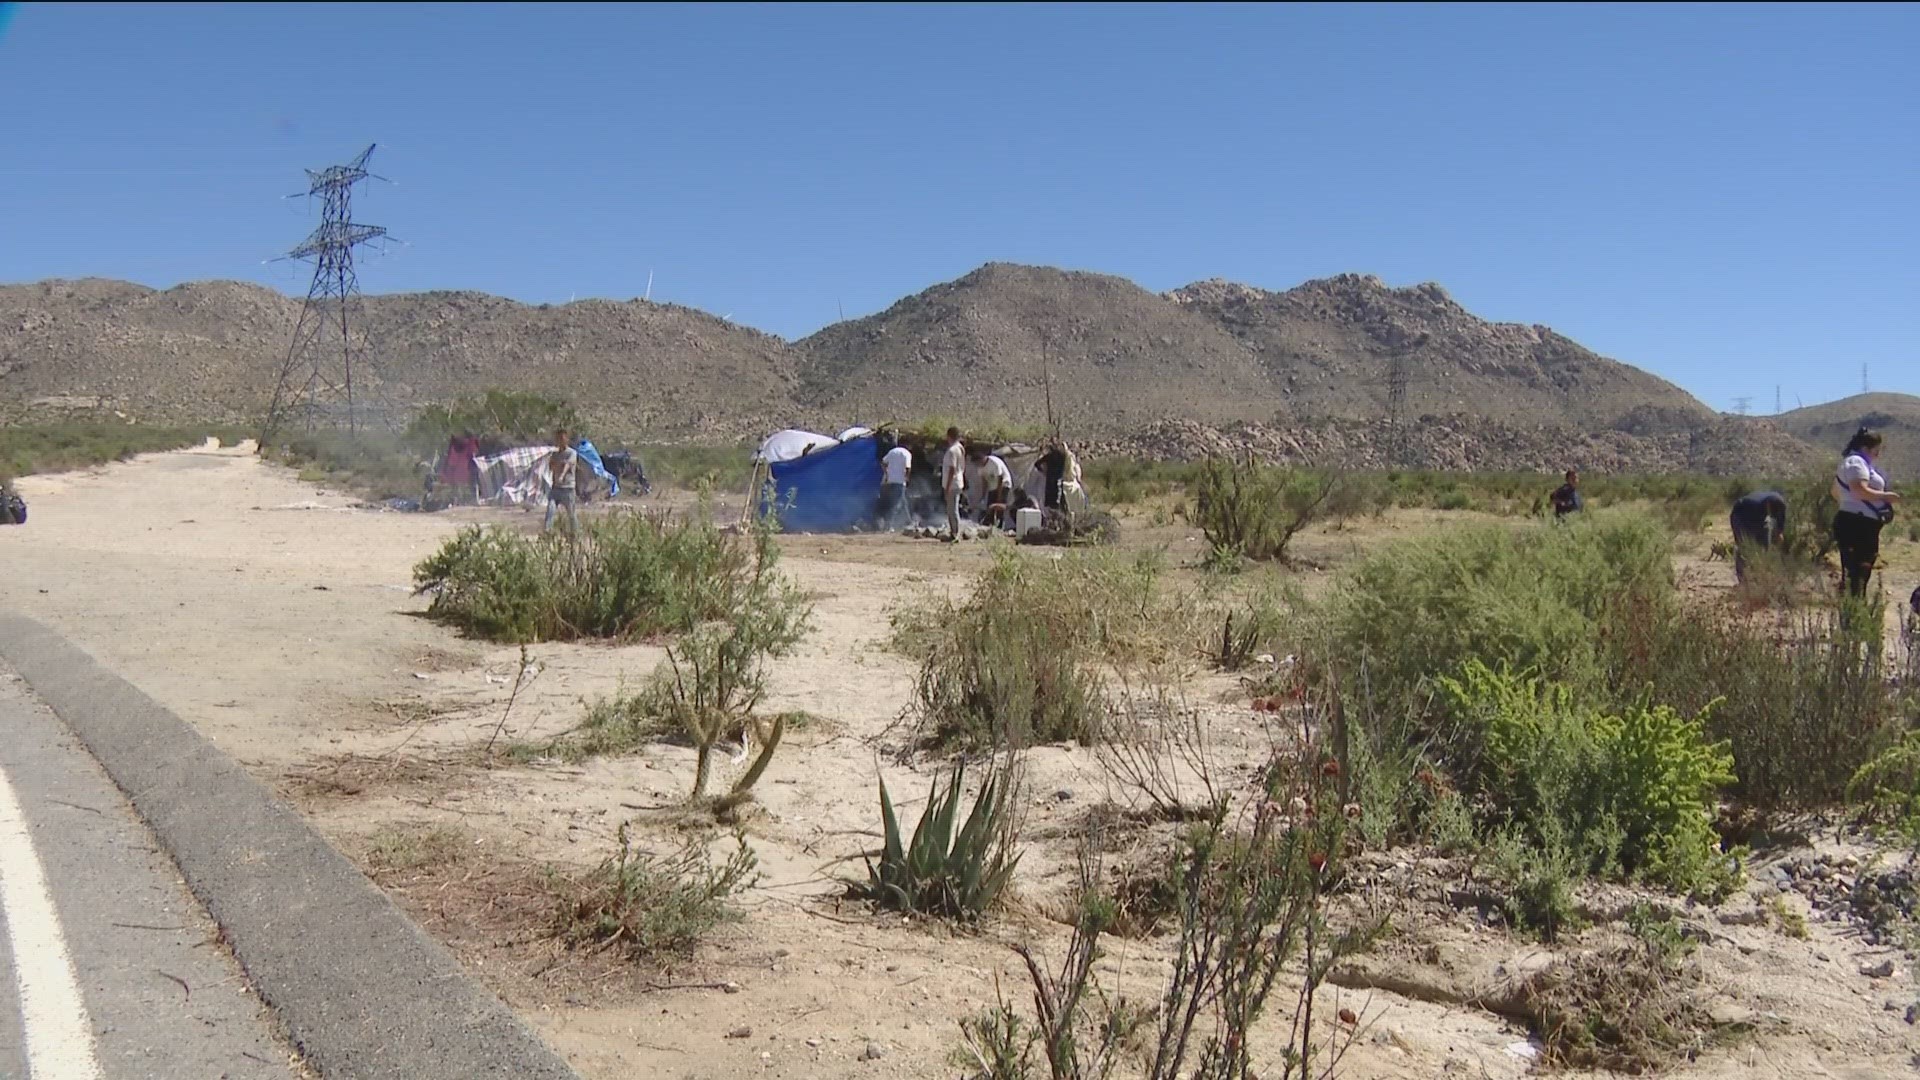 A dozen migrants camped in the desolate area as they waited to be picked up and processed by U.S. Border Patrol.